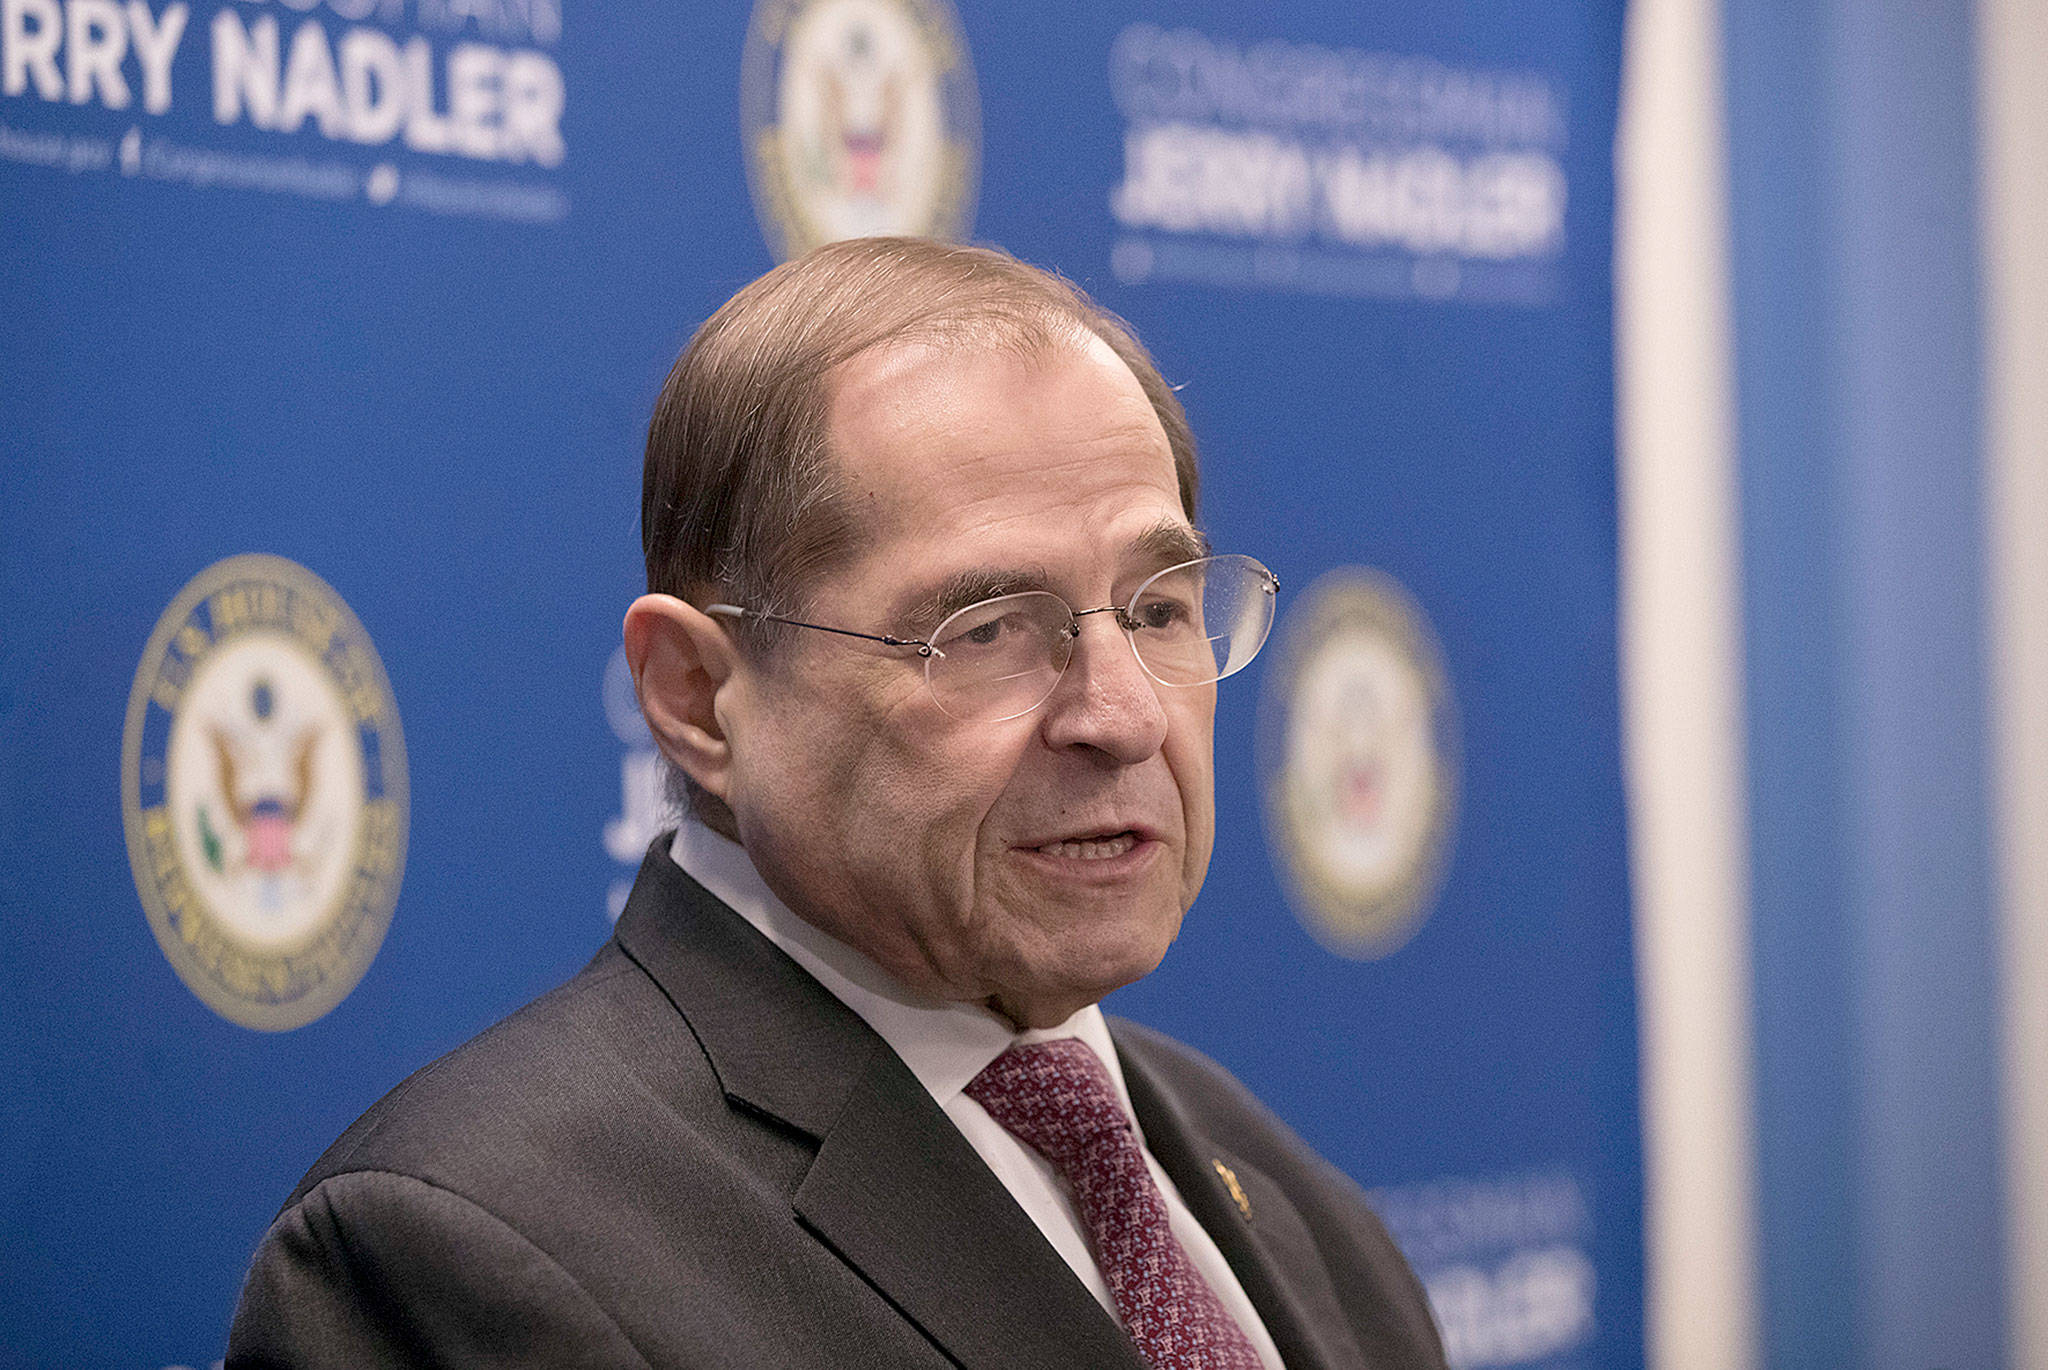 U.S. Rep. Jerrold Nadler, D-New York, chair of the House Judiciary Committee, speaks during a news conference on Thursday in New York. (AP Photo/Mary Altaffer)